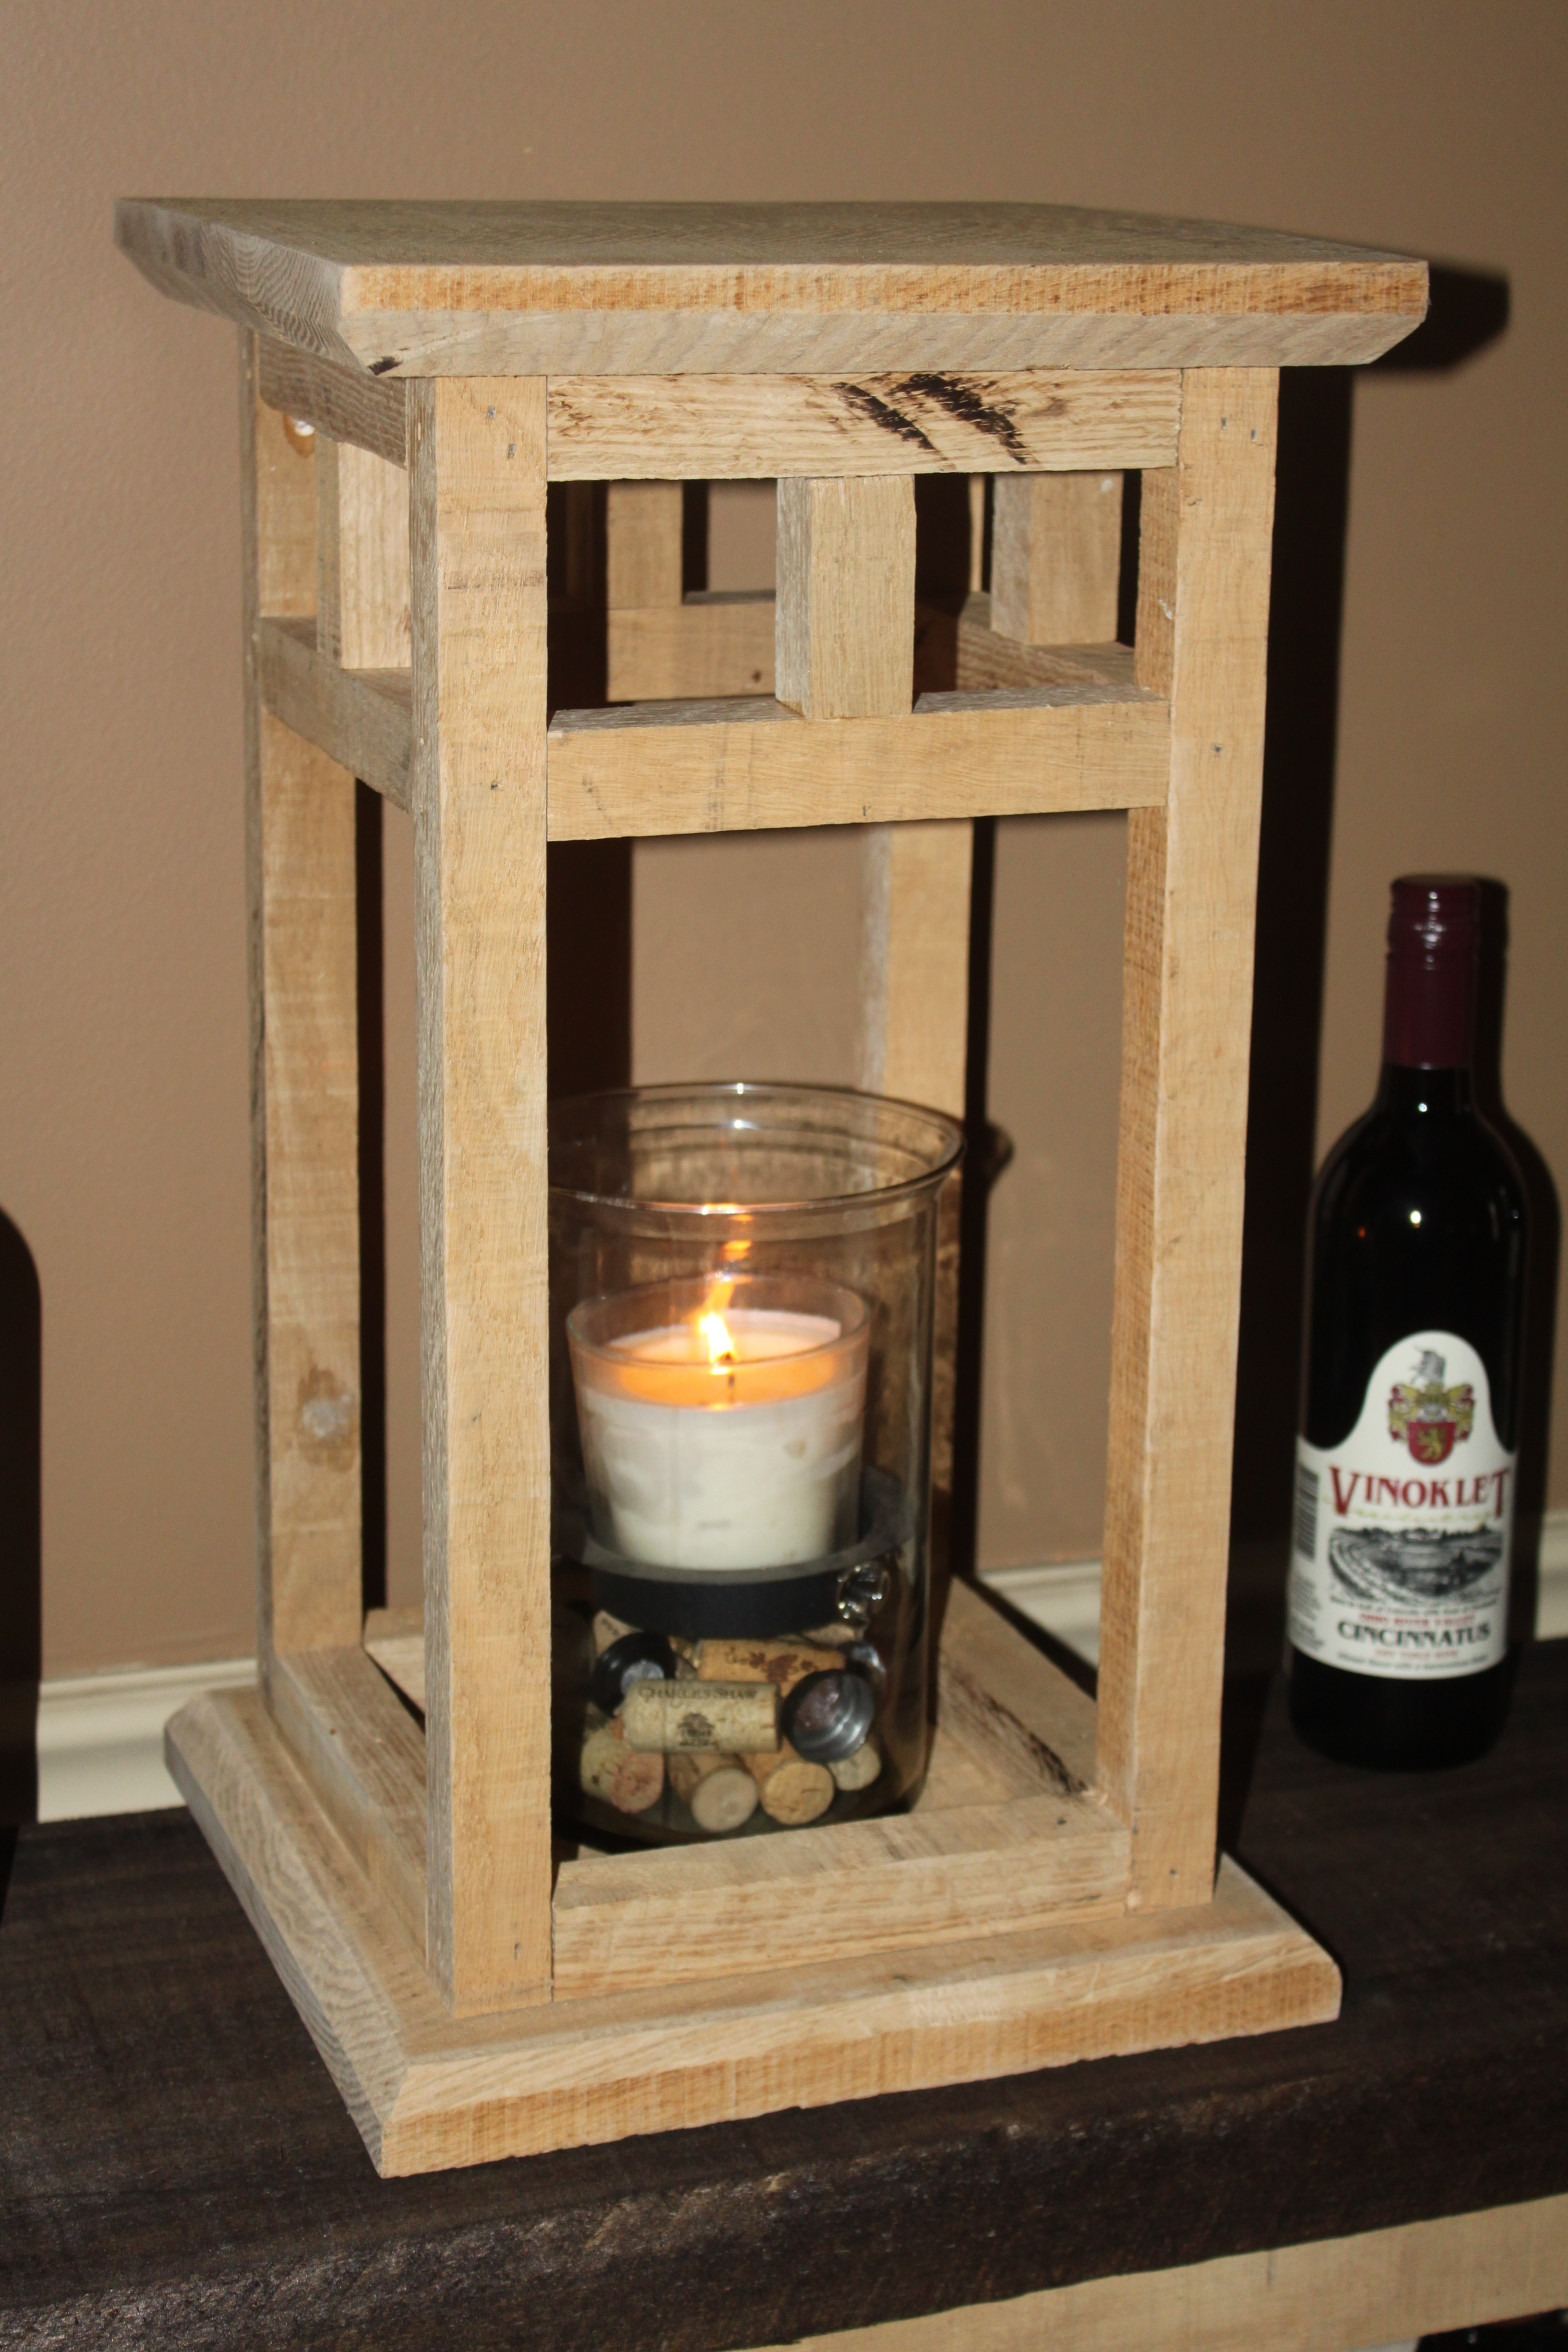 DIY Wood Lantern
 The DIY Rustic Wood Lantern Project Made From Pallets